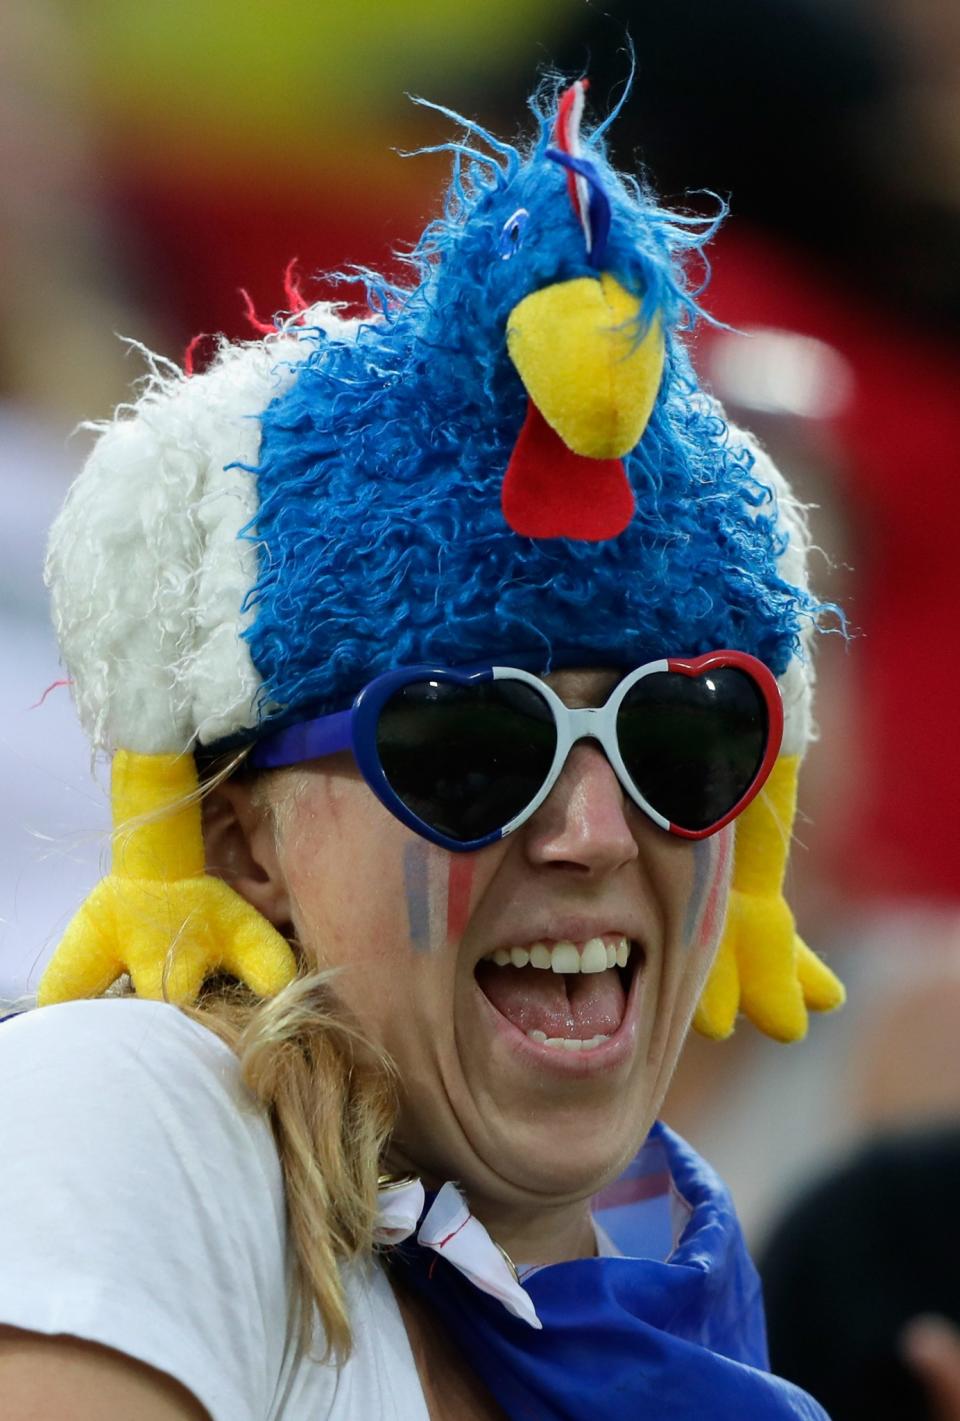 <p>A fan of France enjoys the atmosphere during the Women’s Placing 7-8 Rugby Sevens match between France and United States of America on Day 3 of the Rio 2016 Olympic Games at the Deodoro Stadium on August 8, 2016 in Rio de Janeiro, Brazil. (Photo by Jamie Squire/Getty Images) </p>